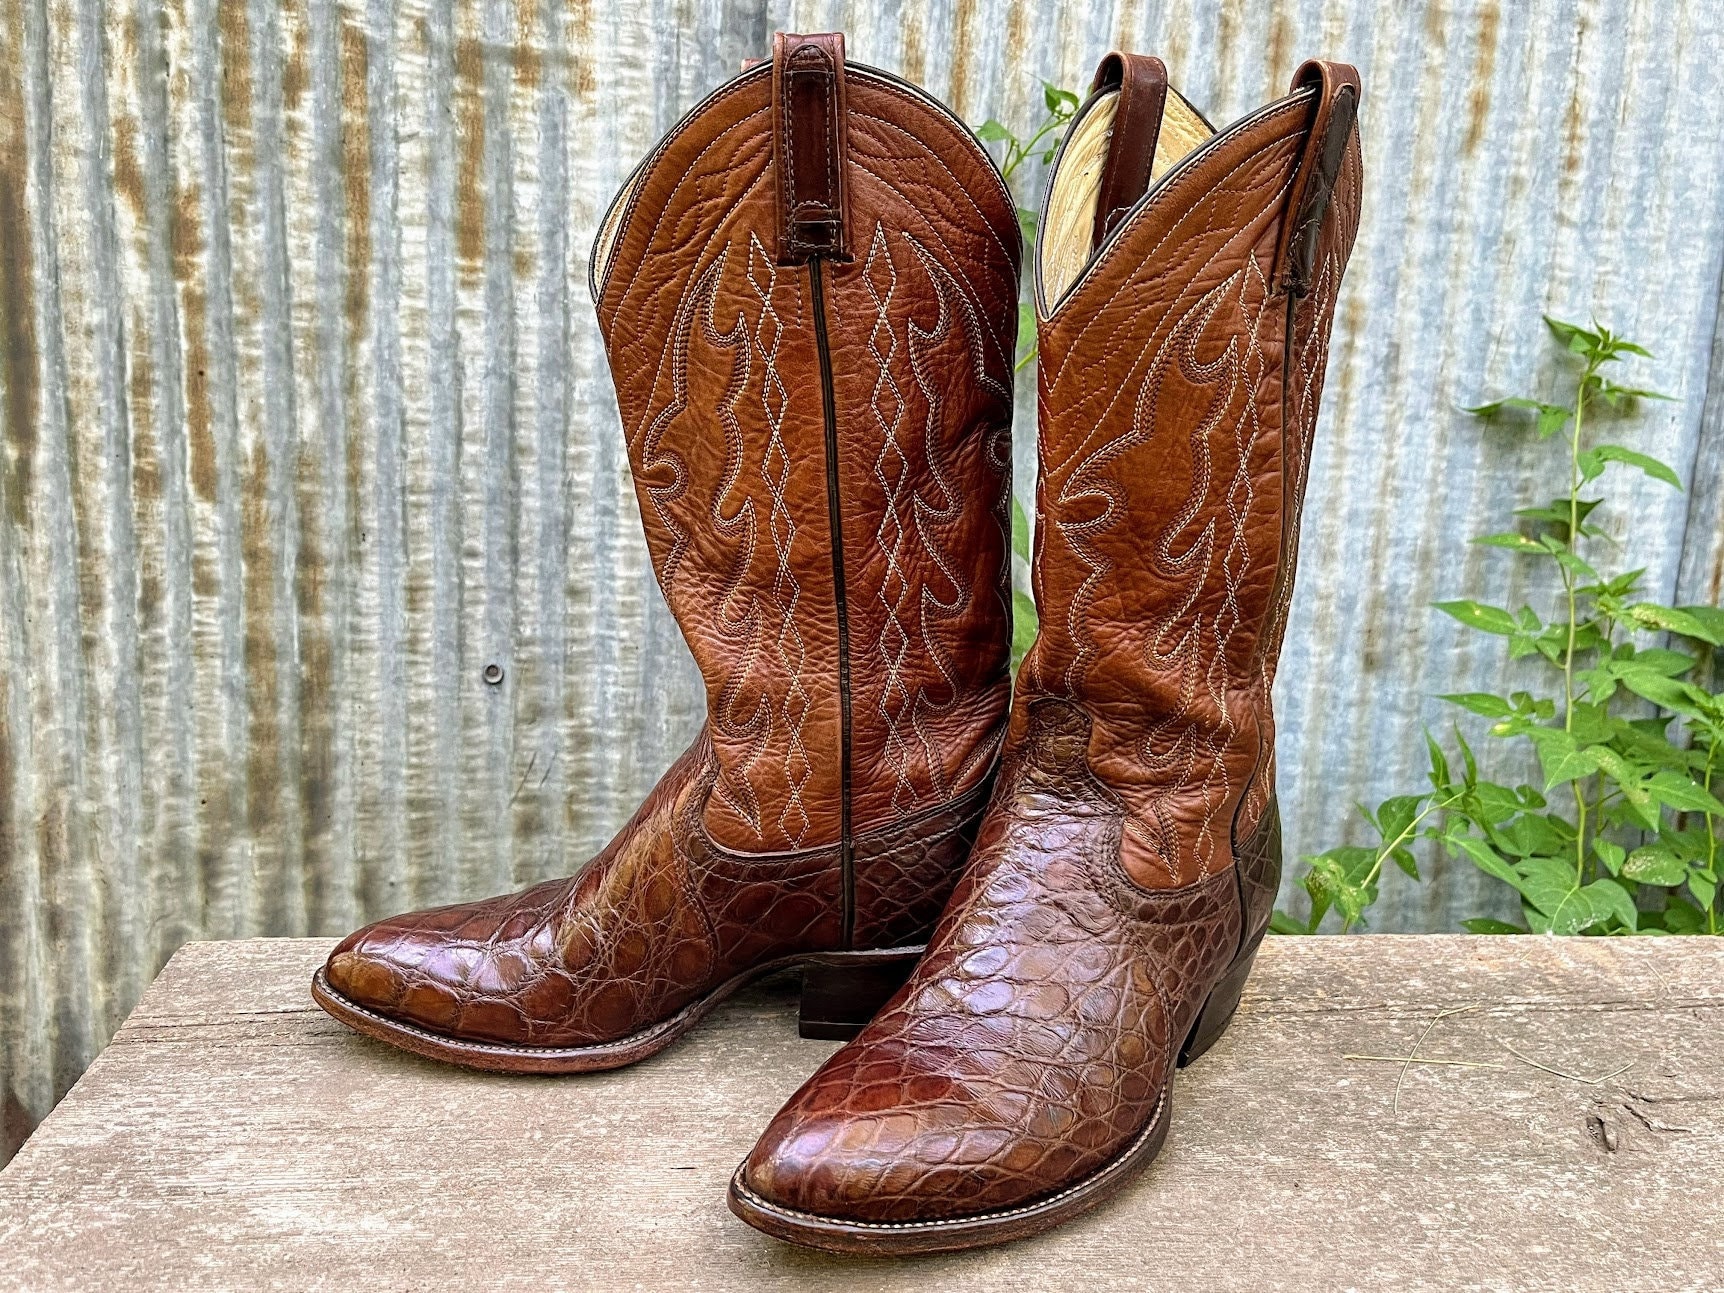 Lucchese Men's Antique Italian Red Giant Gator Cowboy Boots